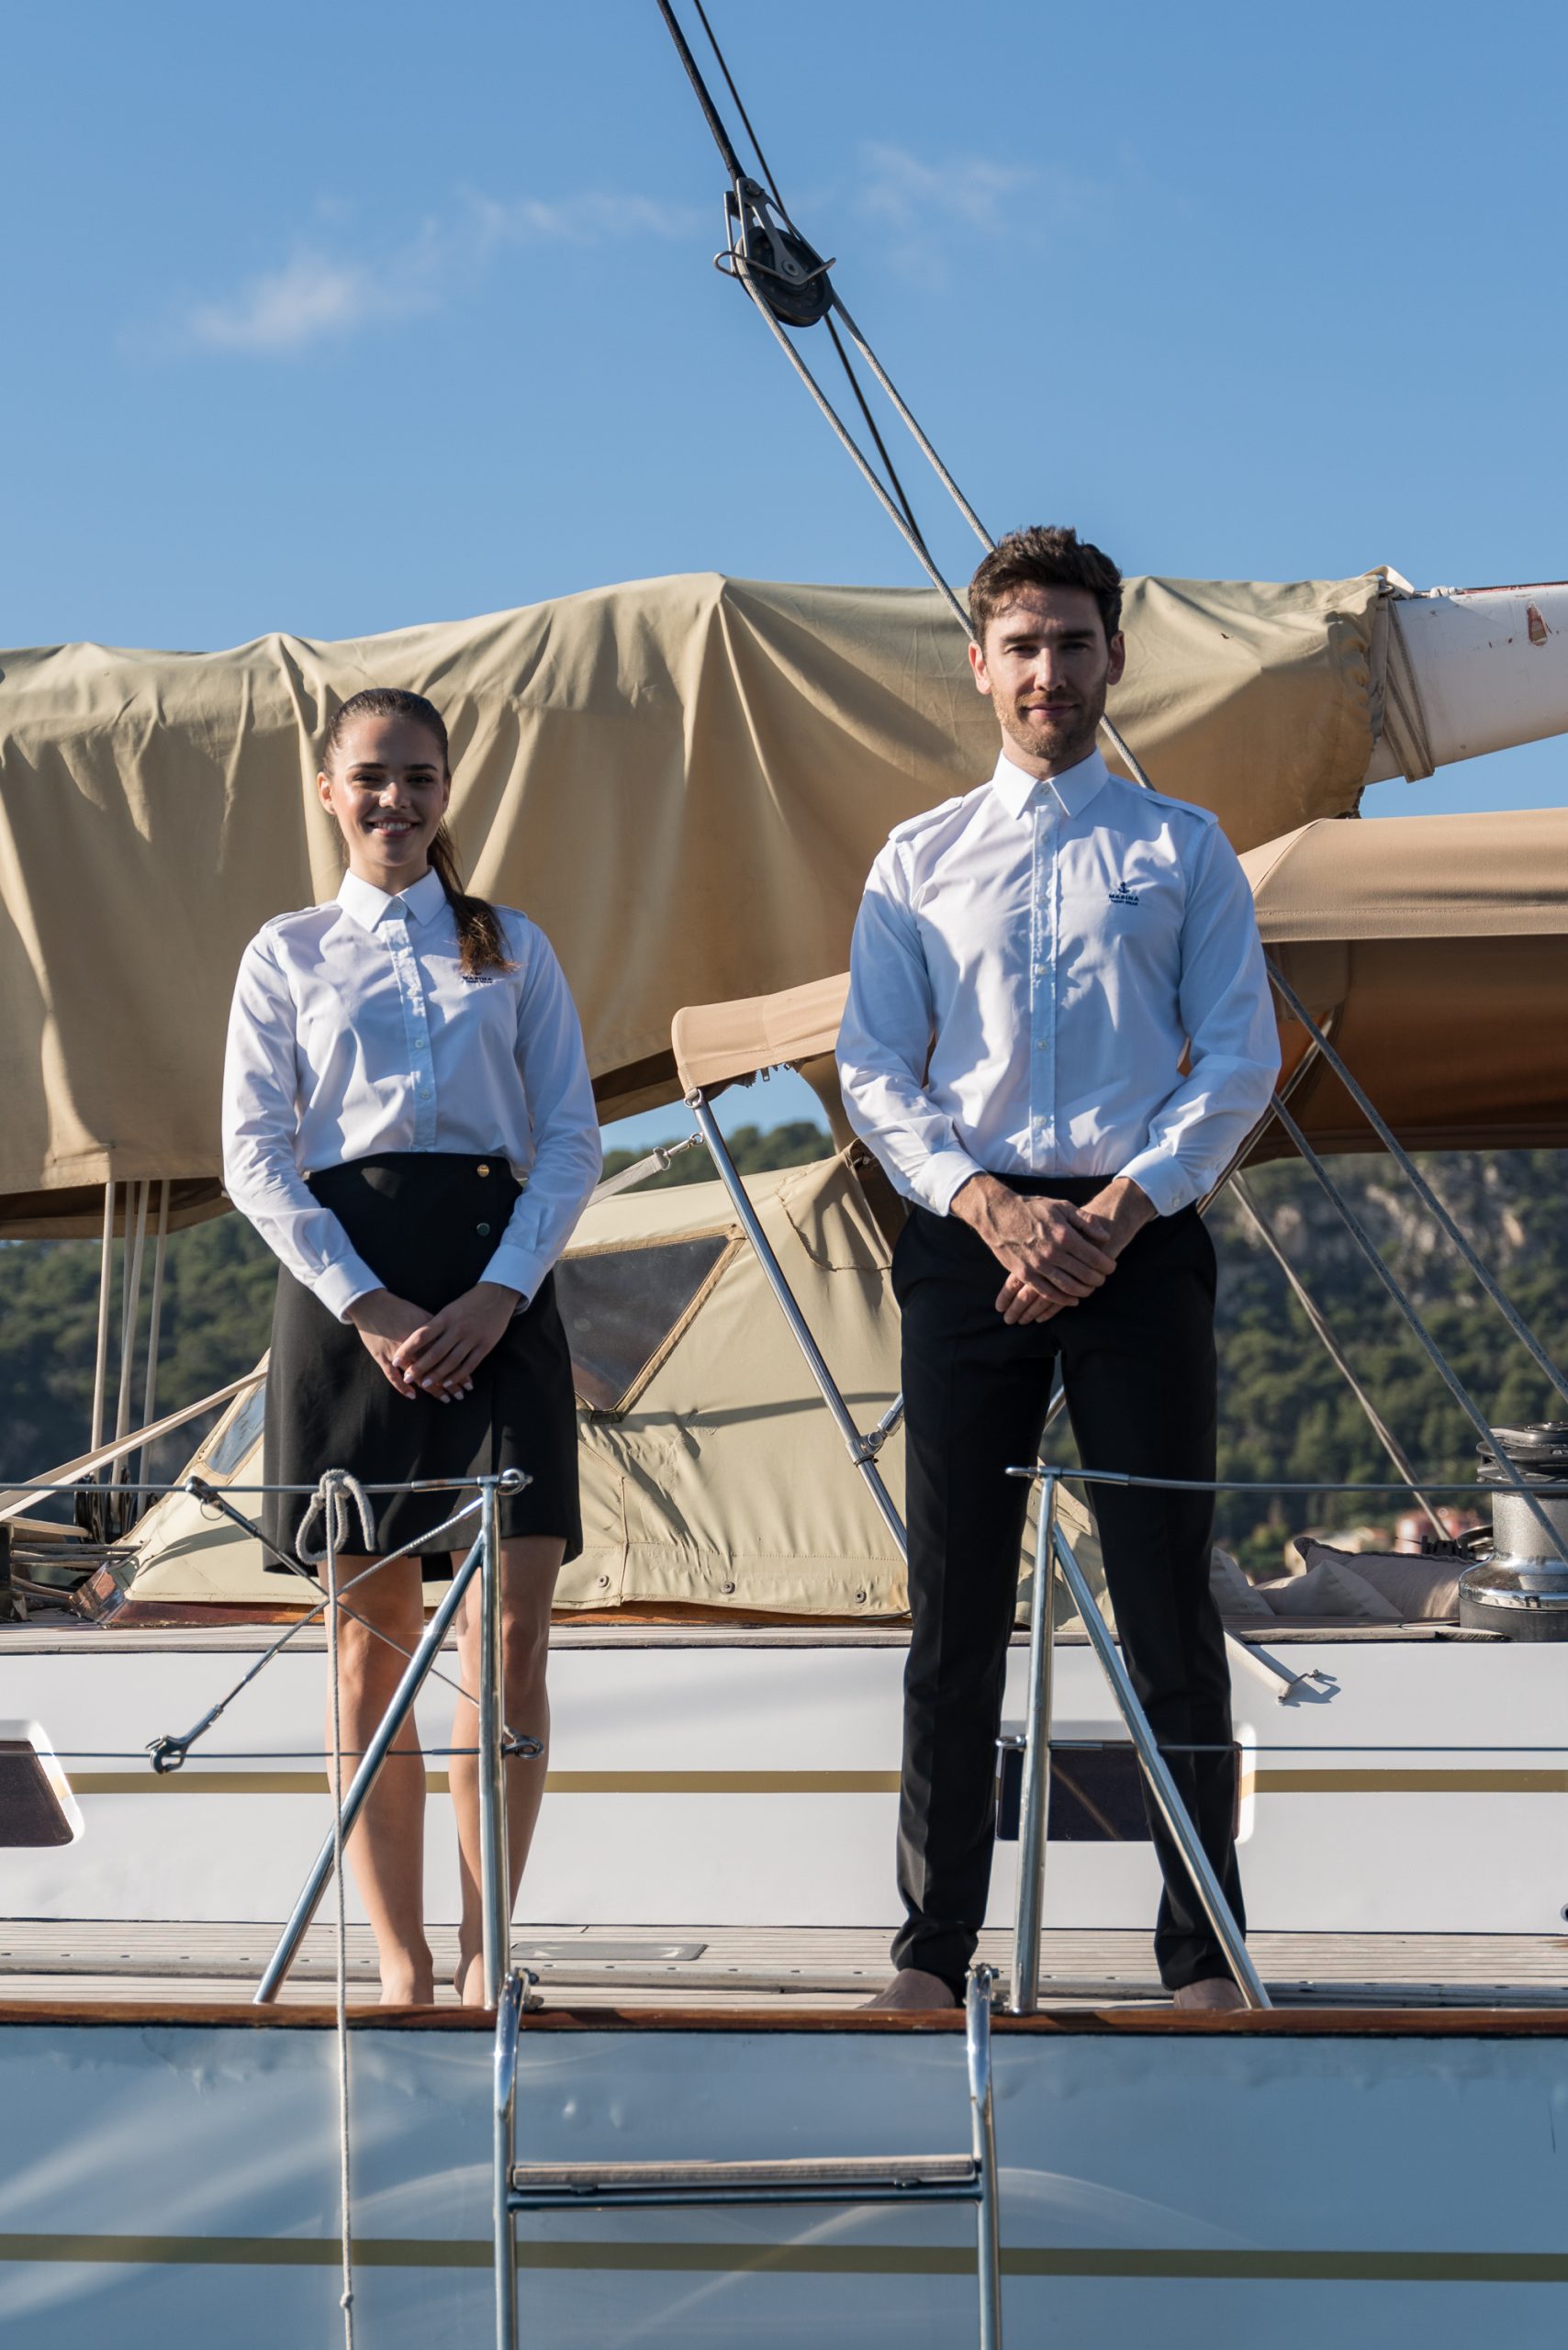 yachting clothes uk